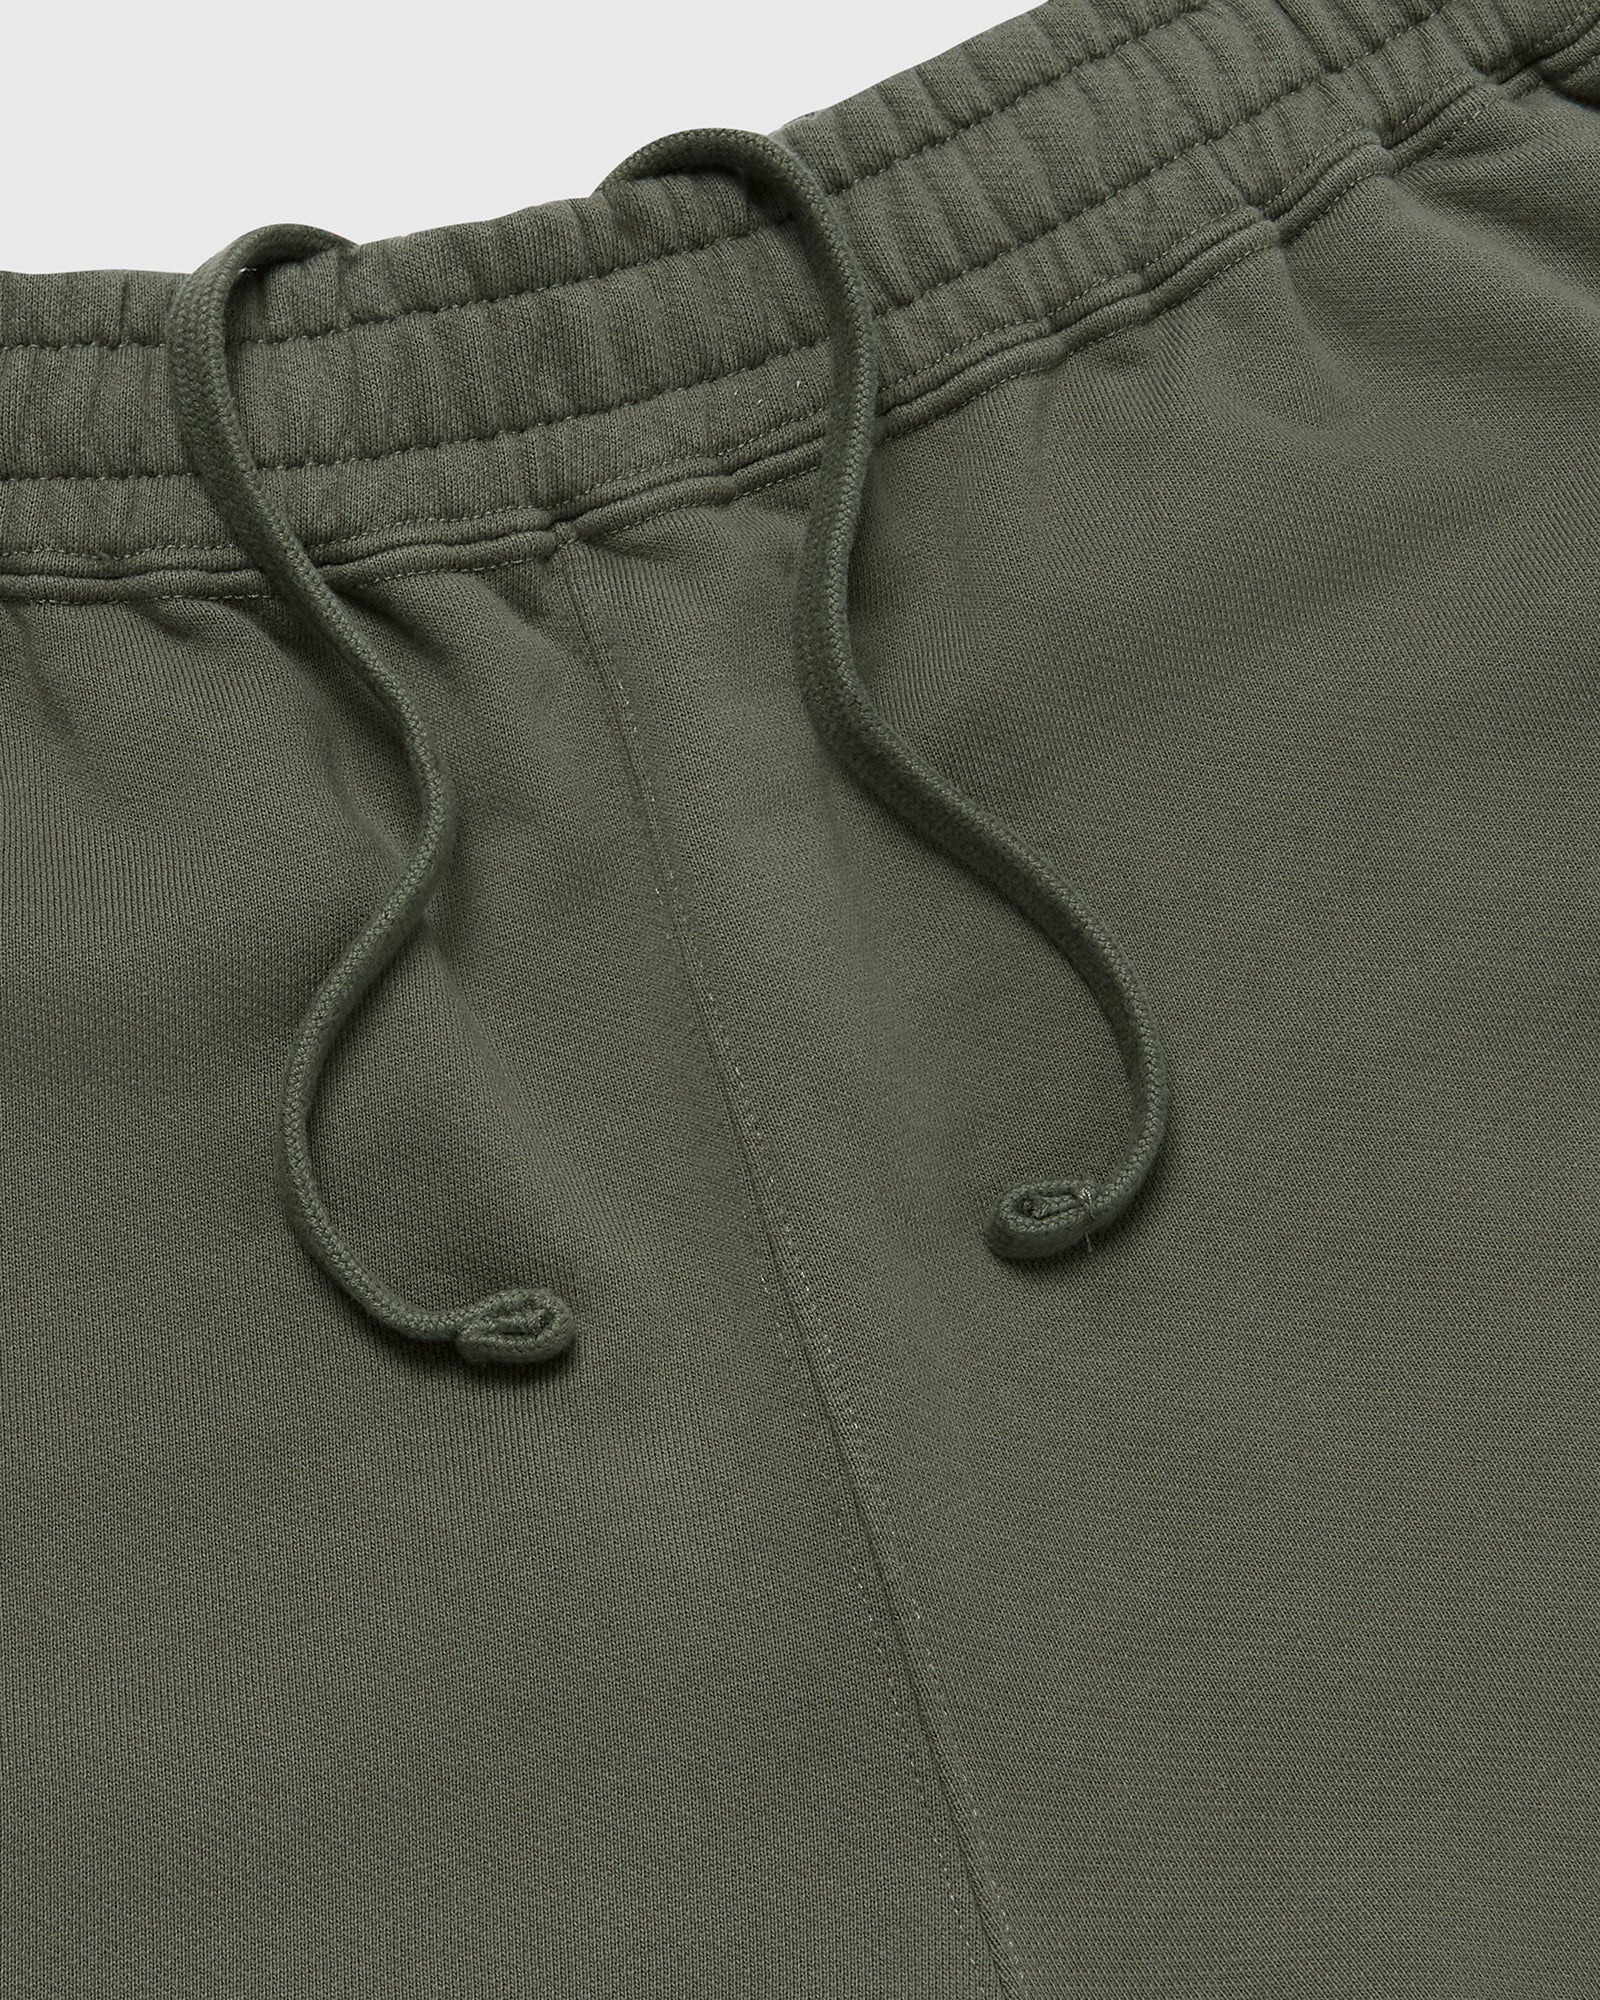 Classic Relaxed Fit Sweatpant - Sage